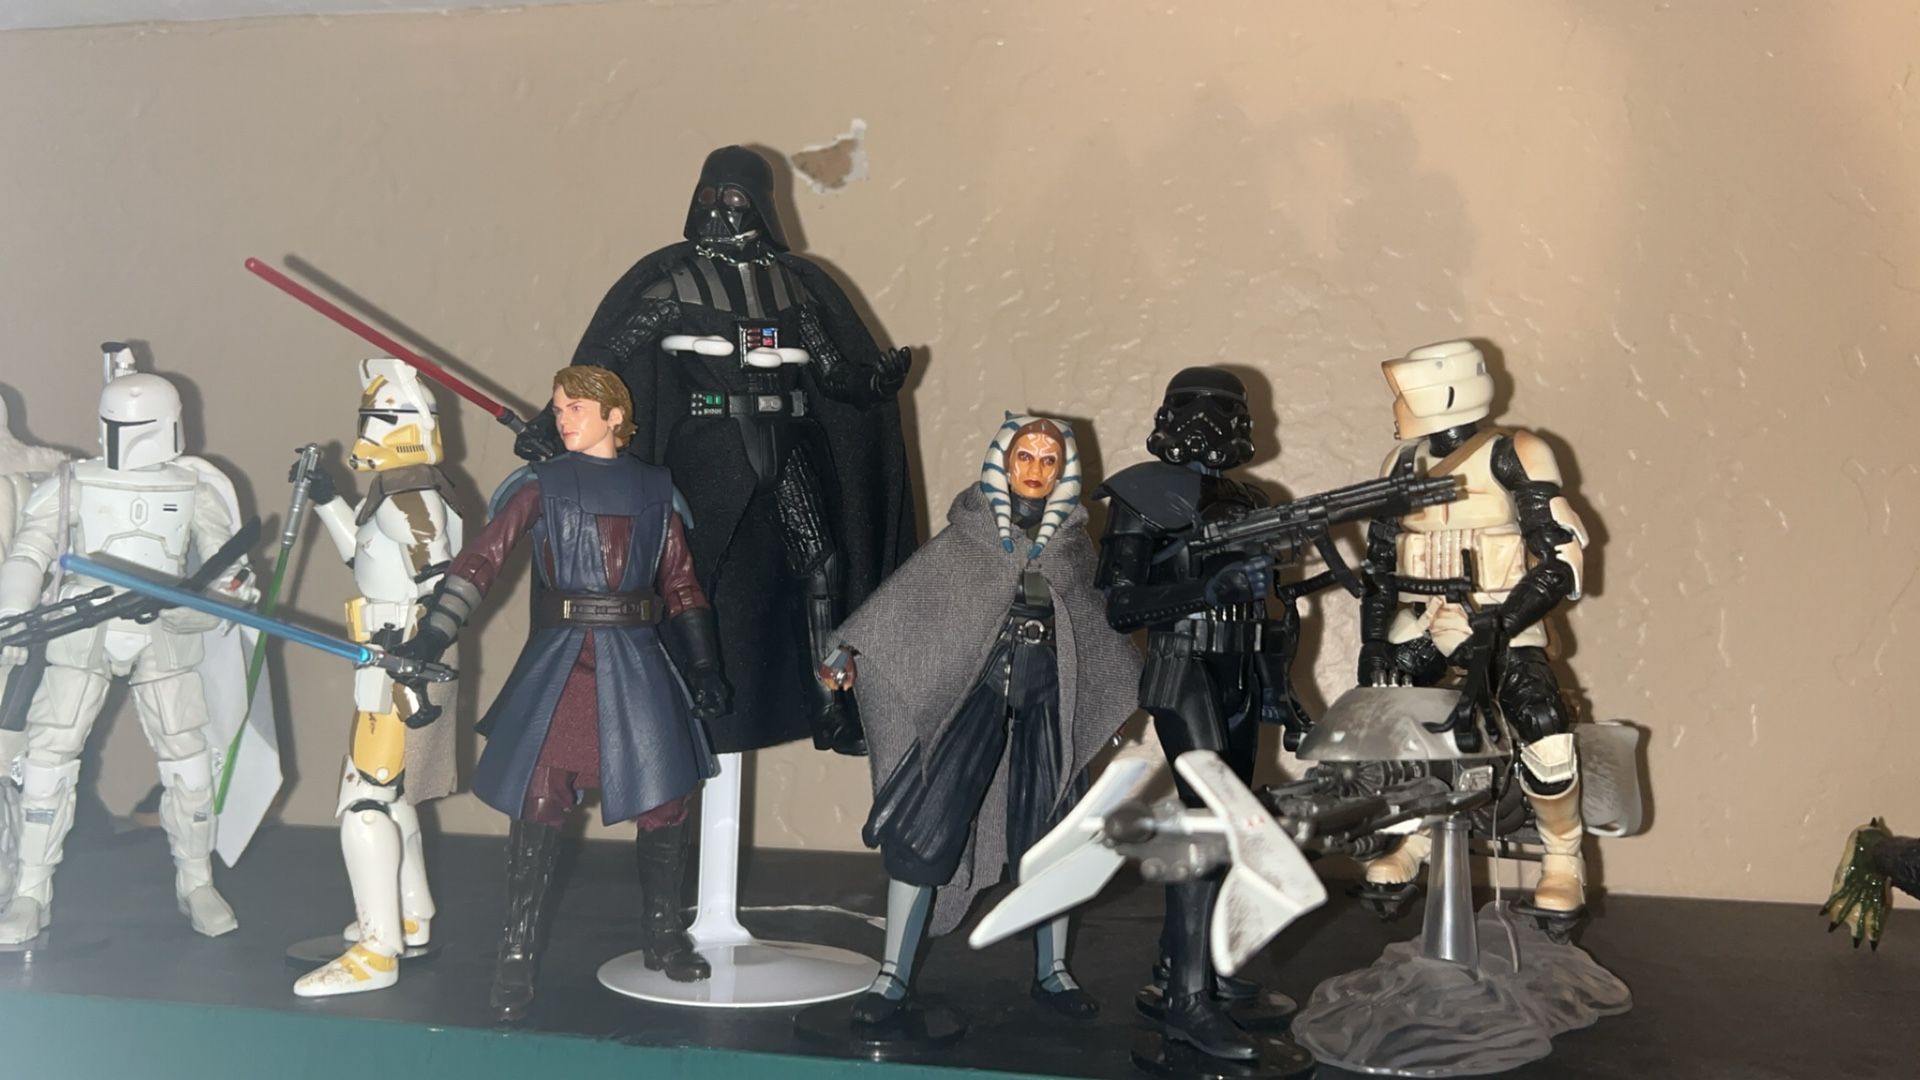 STAR WARS COLLECTABLE FOR CHEAP